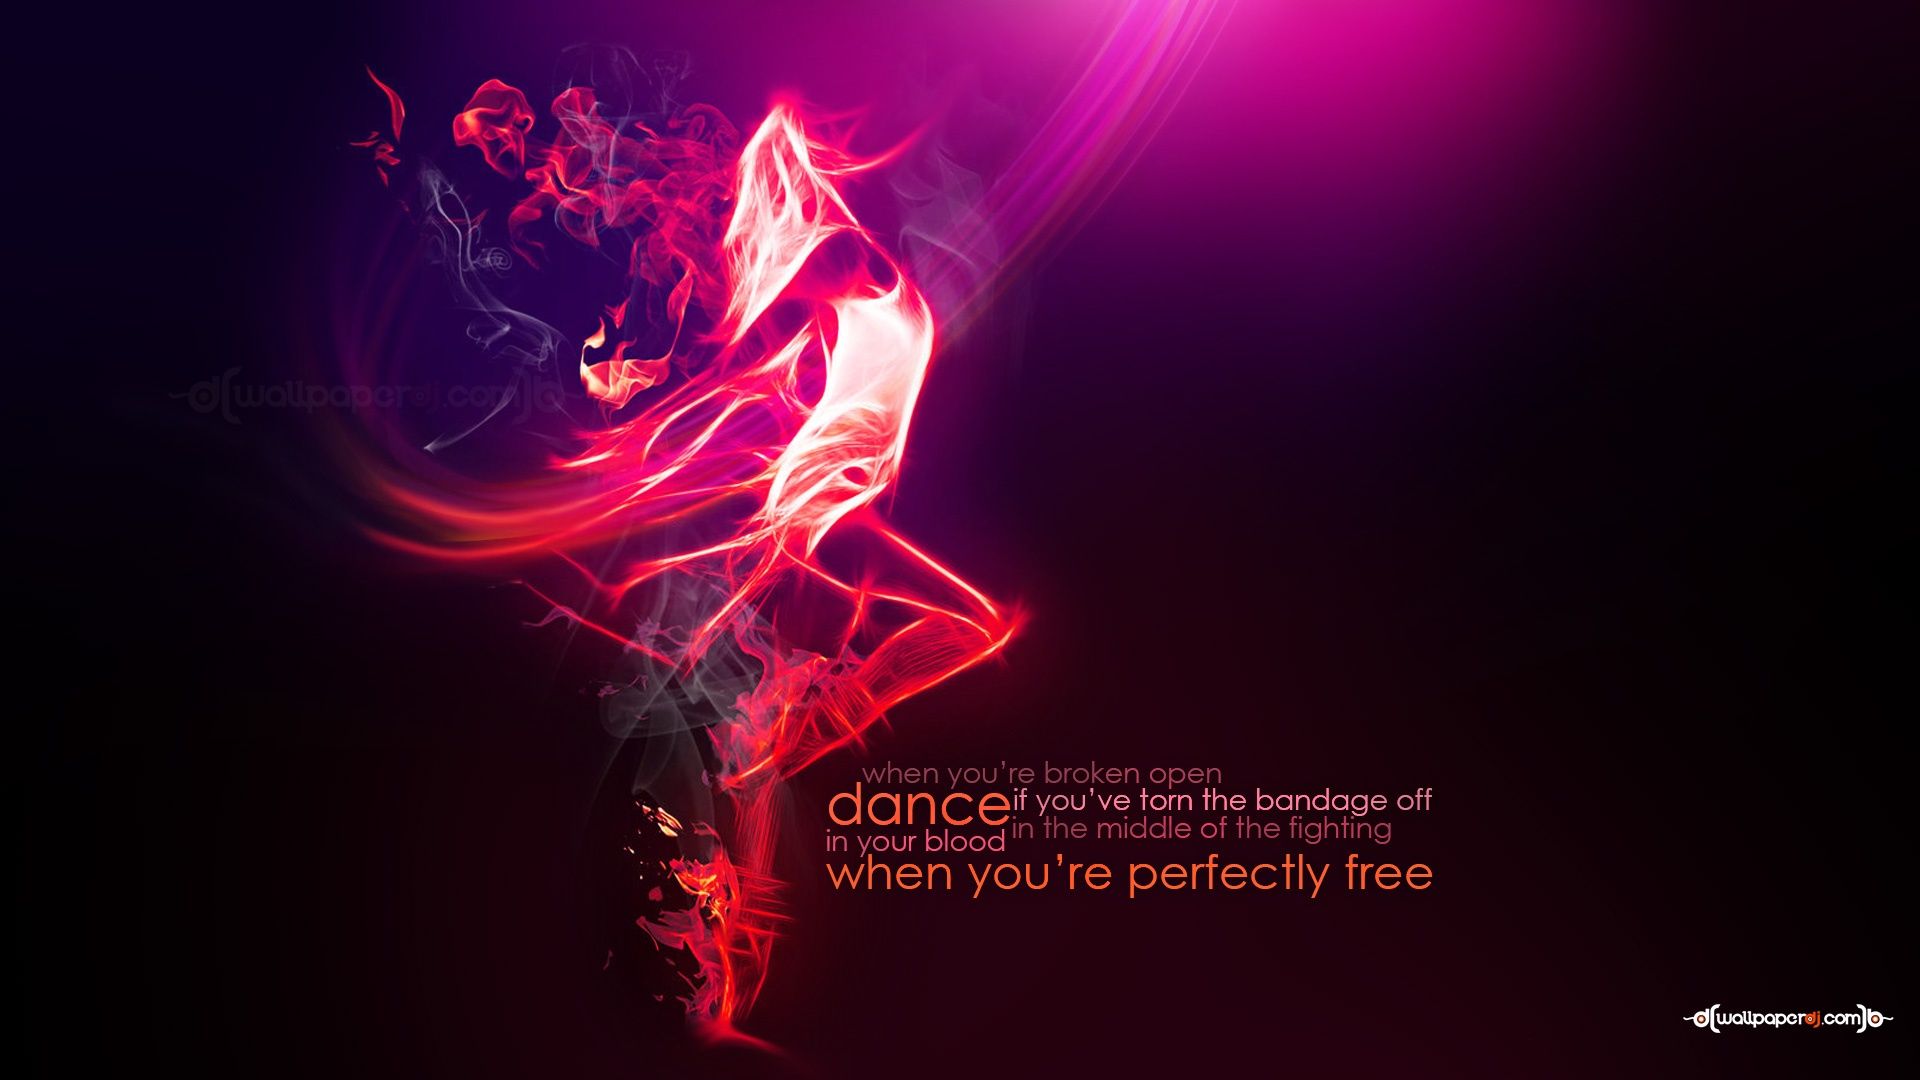 Dancing With Fire wallpaper, music and dance wallpaper